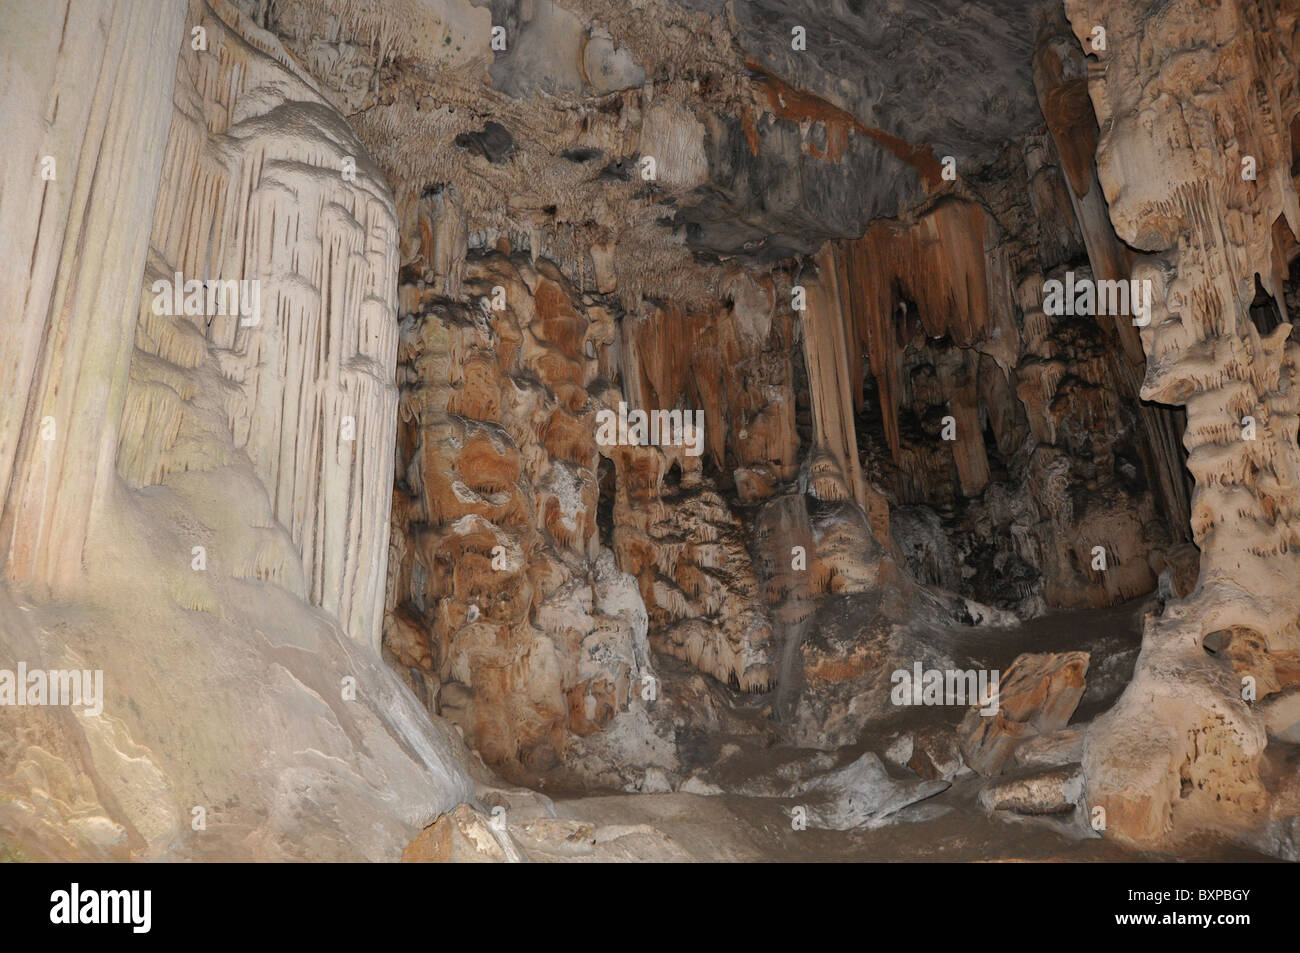 Dripstone formations in Cango Caves, Oudtshoorn, South Africa Stock Photo